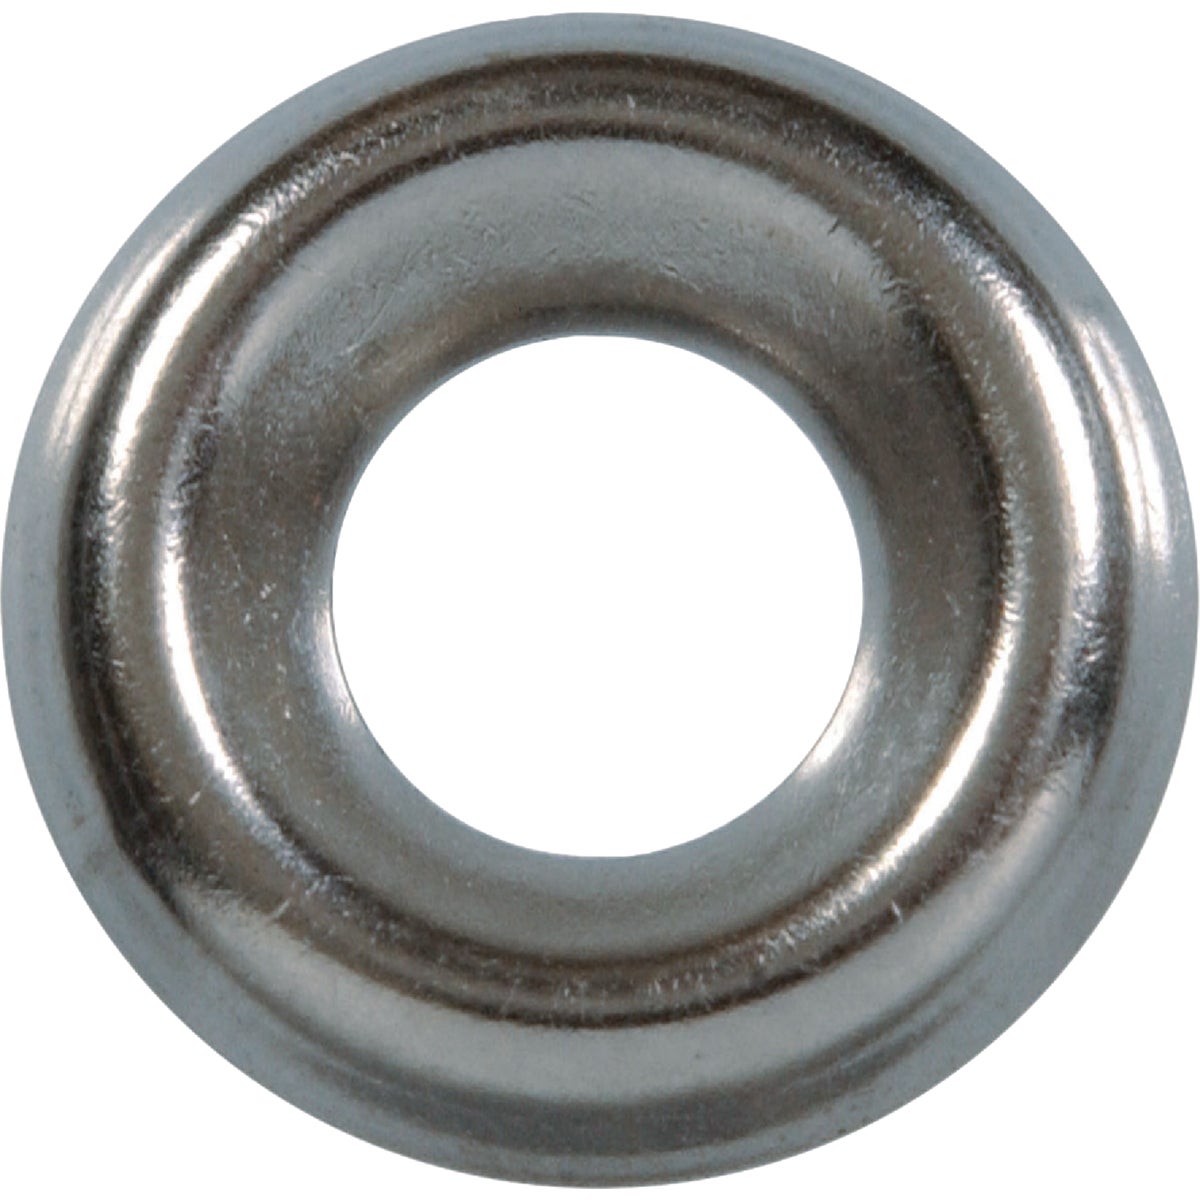 Item 736591, Flat head screw recesses into the finish washer to provide a clean, 